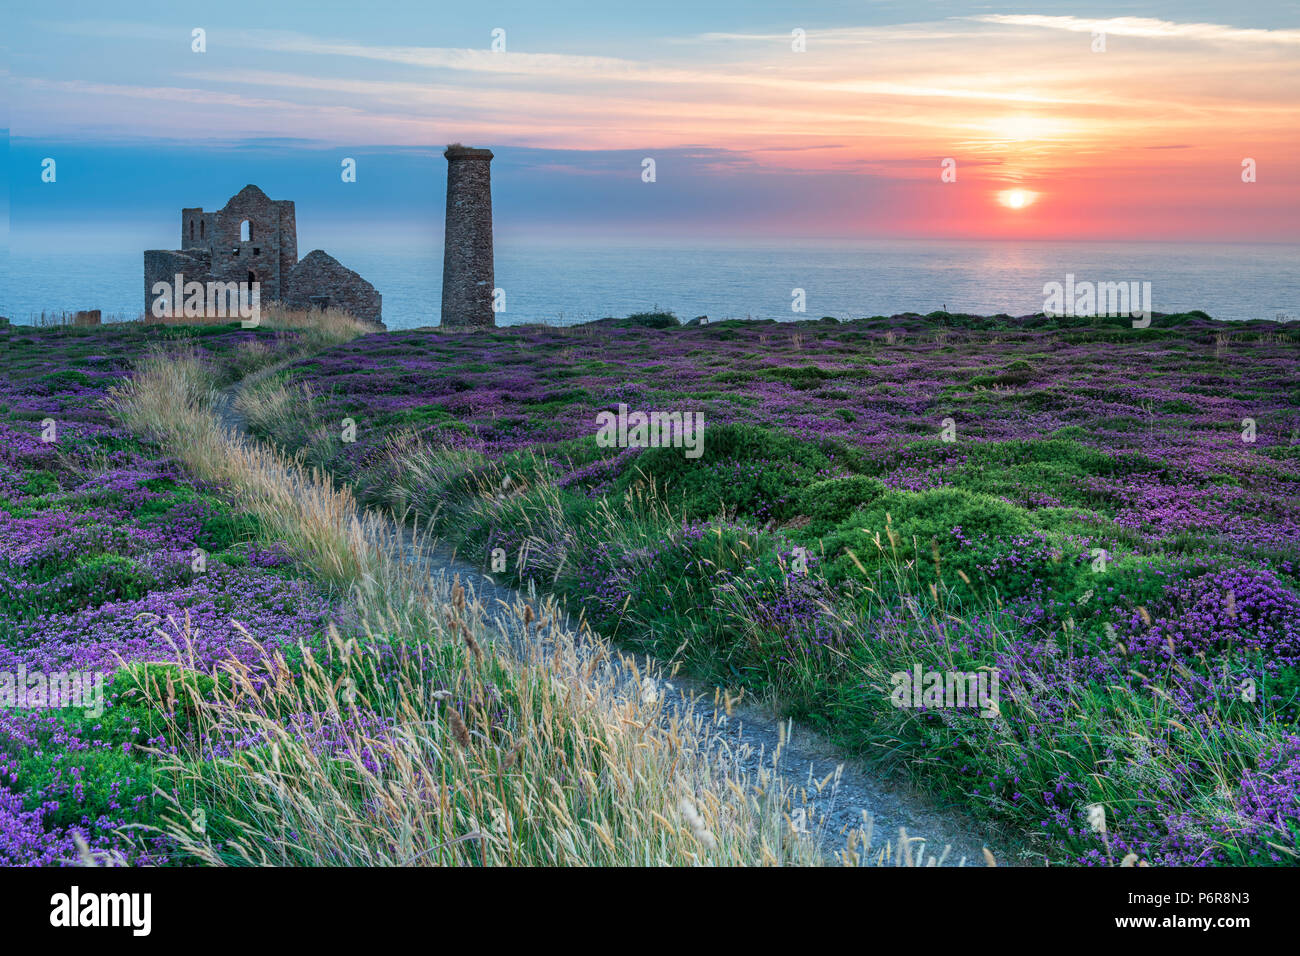 Wheal Coates, Cornwall. 2nd July, 2018. UK Weather - After another warm and humid  day the high cloud breaks to give a spectacular  sunset over the heather and gorse at Wheal Coates, deep in the heart of the 'Poldark' county of North Cornwall. Credit: Terry Mathews/Alamy Live News Stock Photo